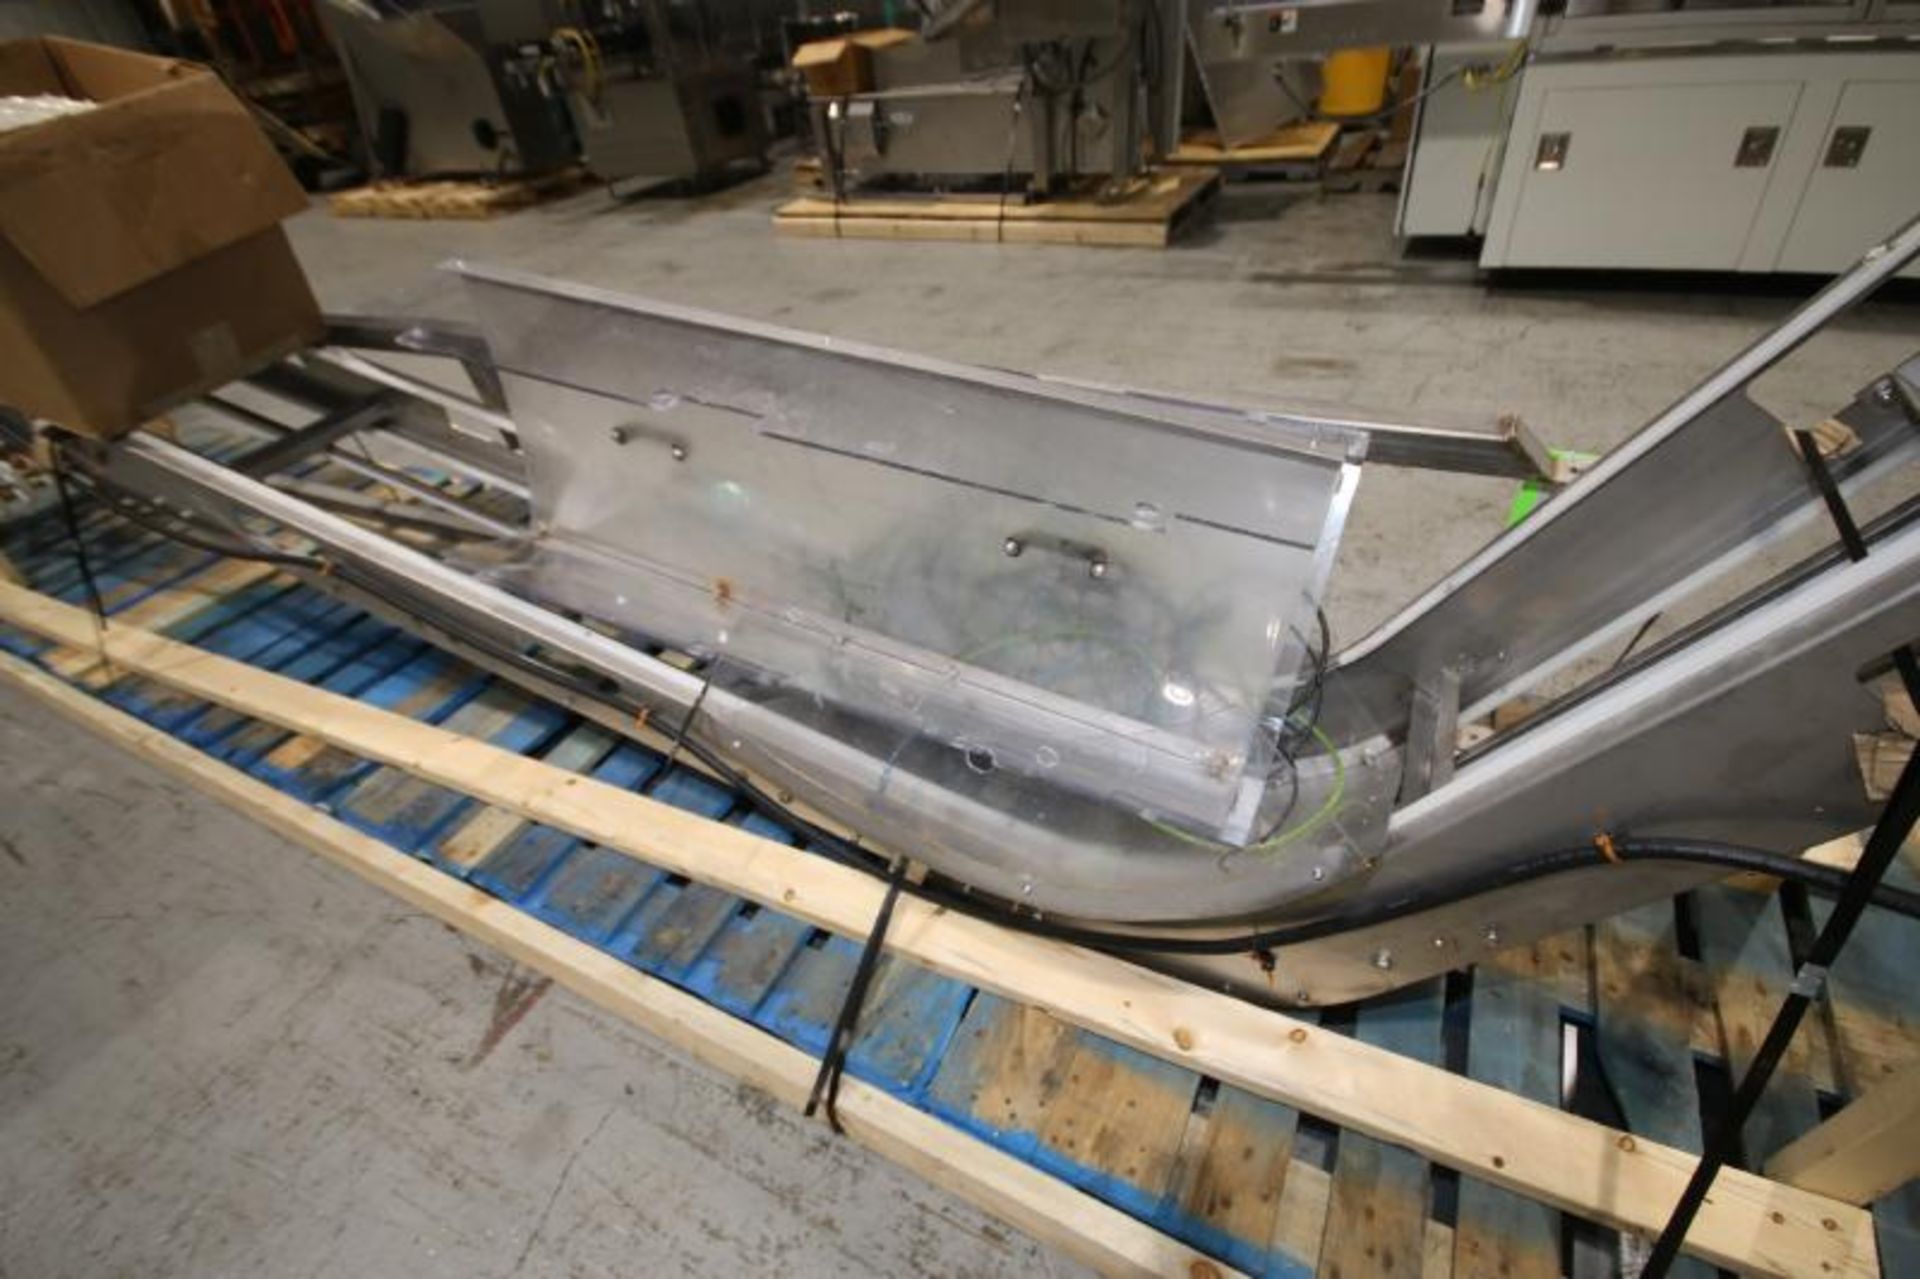 Action Pak S/S Incline Conveyor, Model Elevator, S/N 4595, 110 V, Dimensions Aprox. 19" L x 12" W - Image 5 of 8